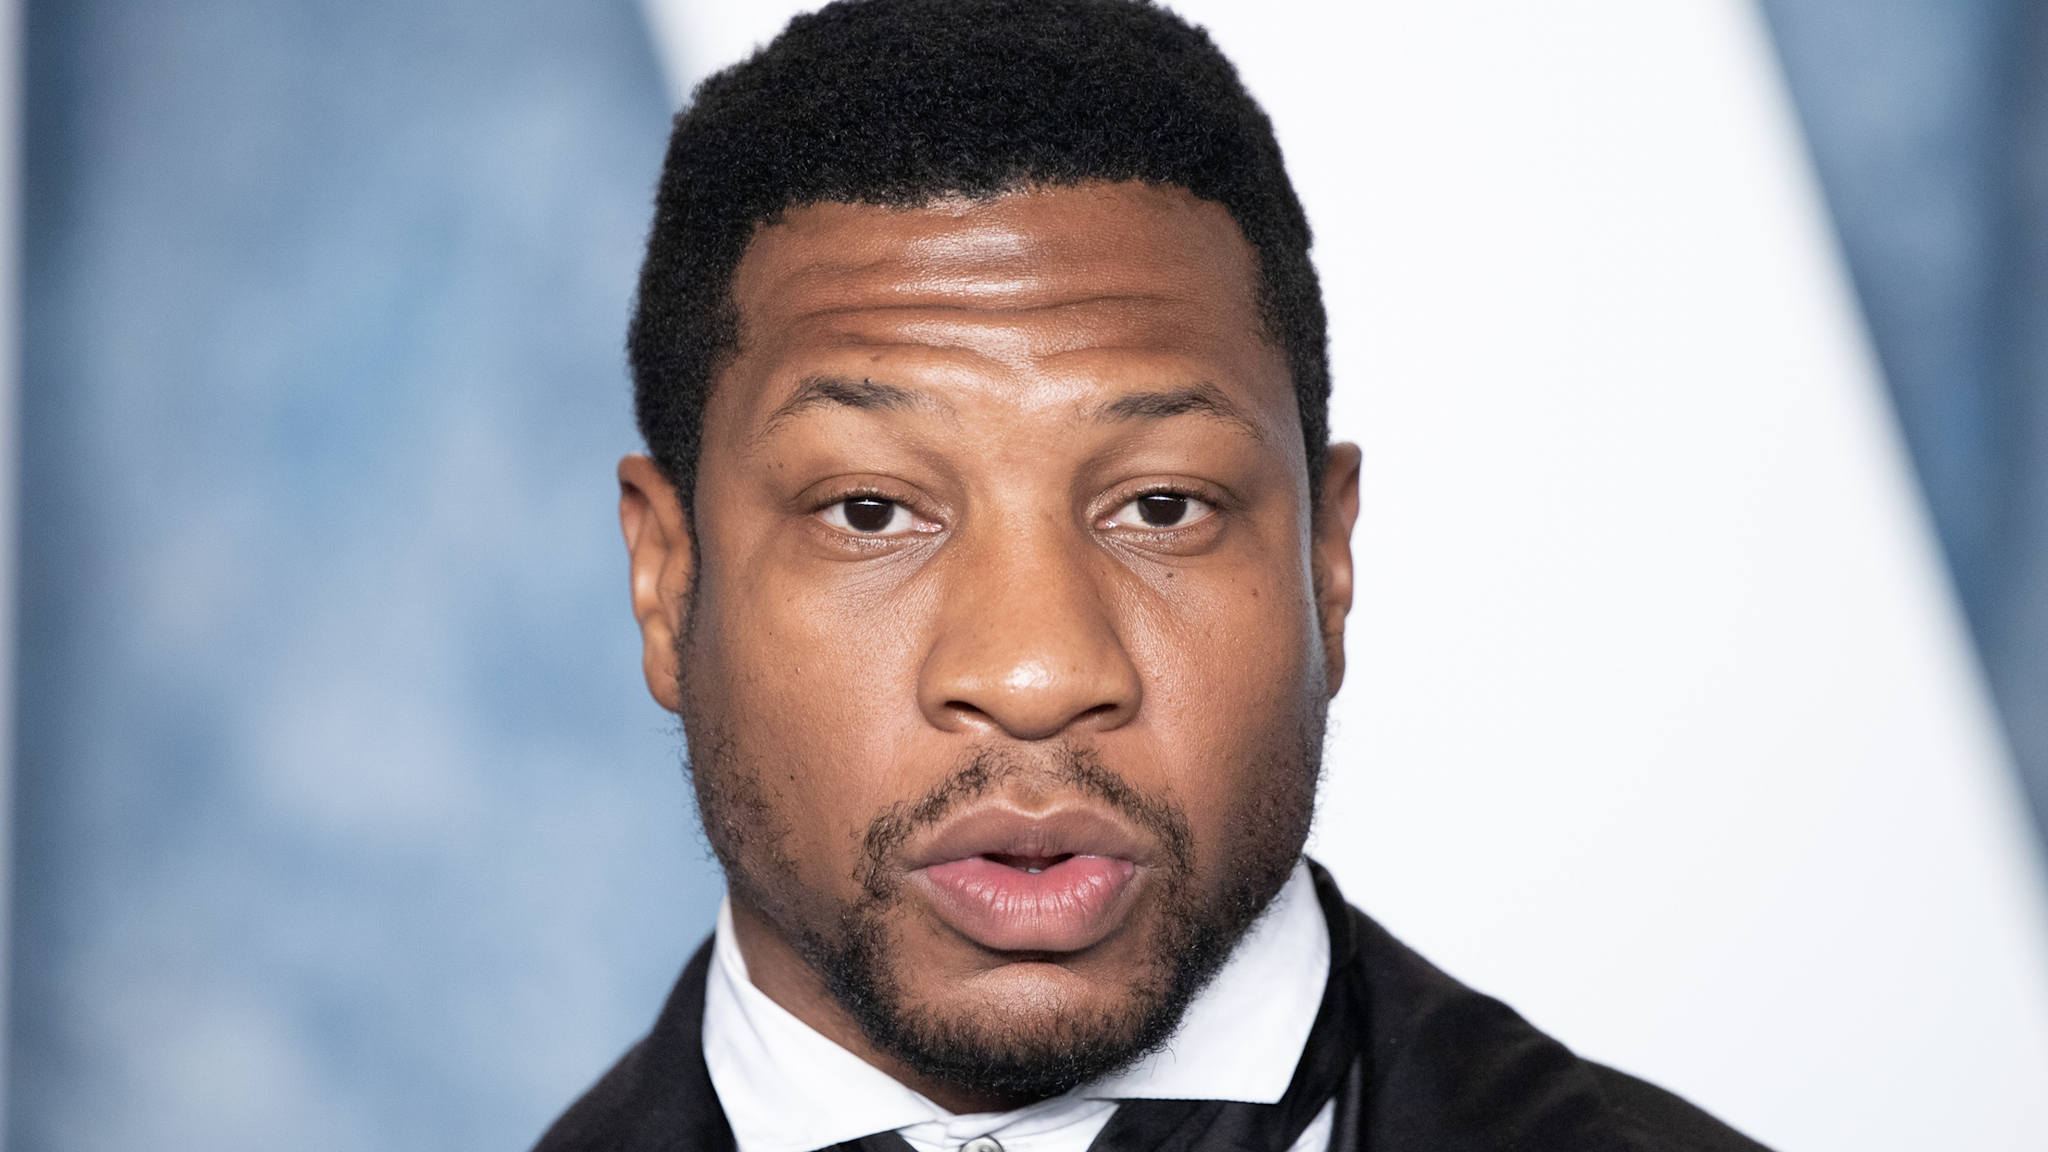 BEVERLY HILLS, CALIFORNIA - MARCH 12: Jonathan Majors attends the 2023 Vanity Fair Oscar Party hosted by Radhika Jones at Wallis Annenberg Center for the Performing Arts on March 12, 2023 in Beverly Hills, California.